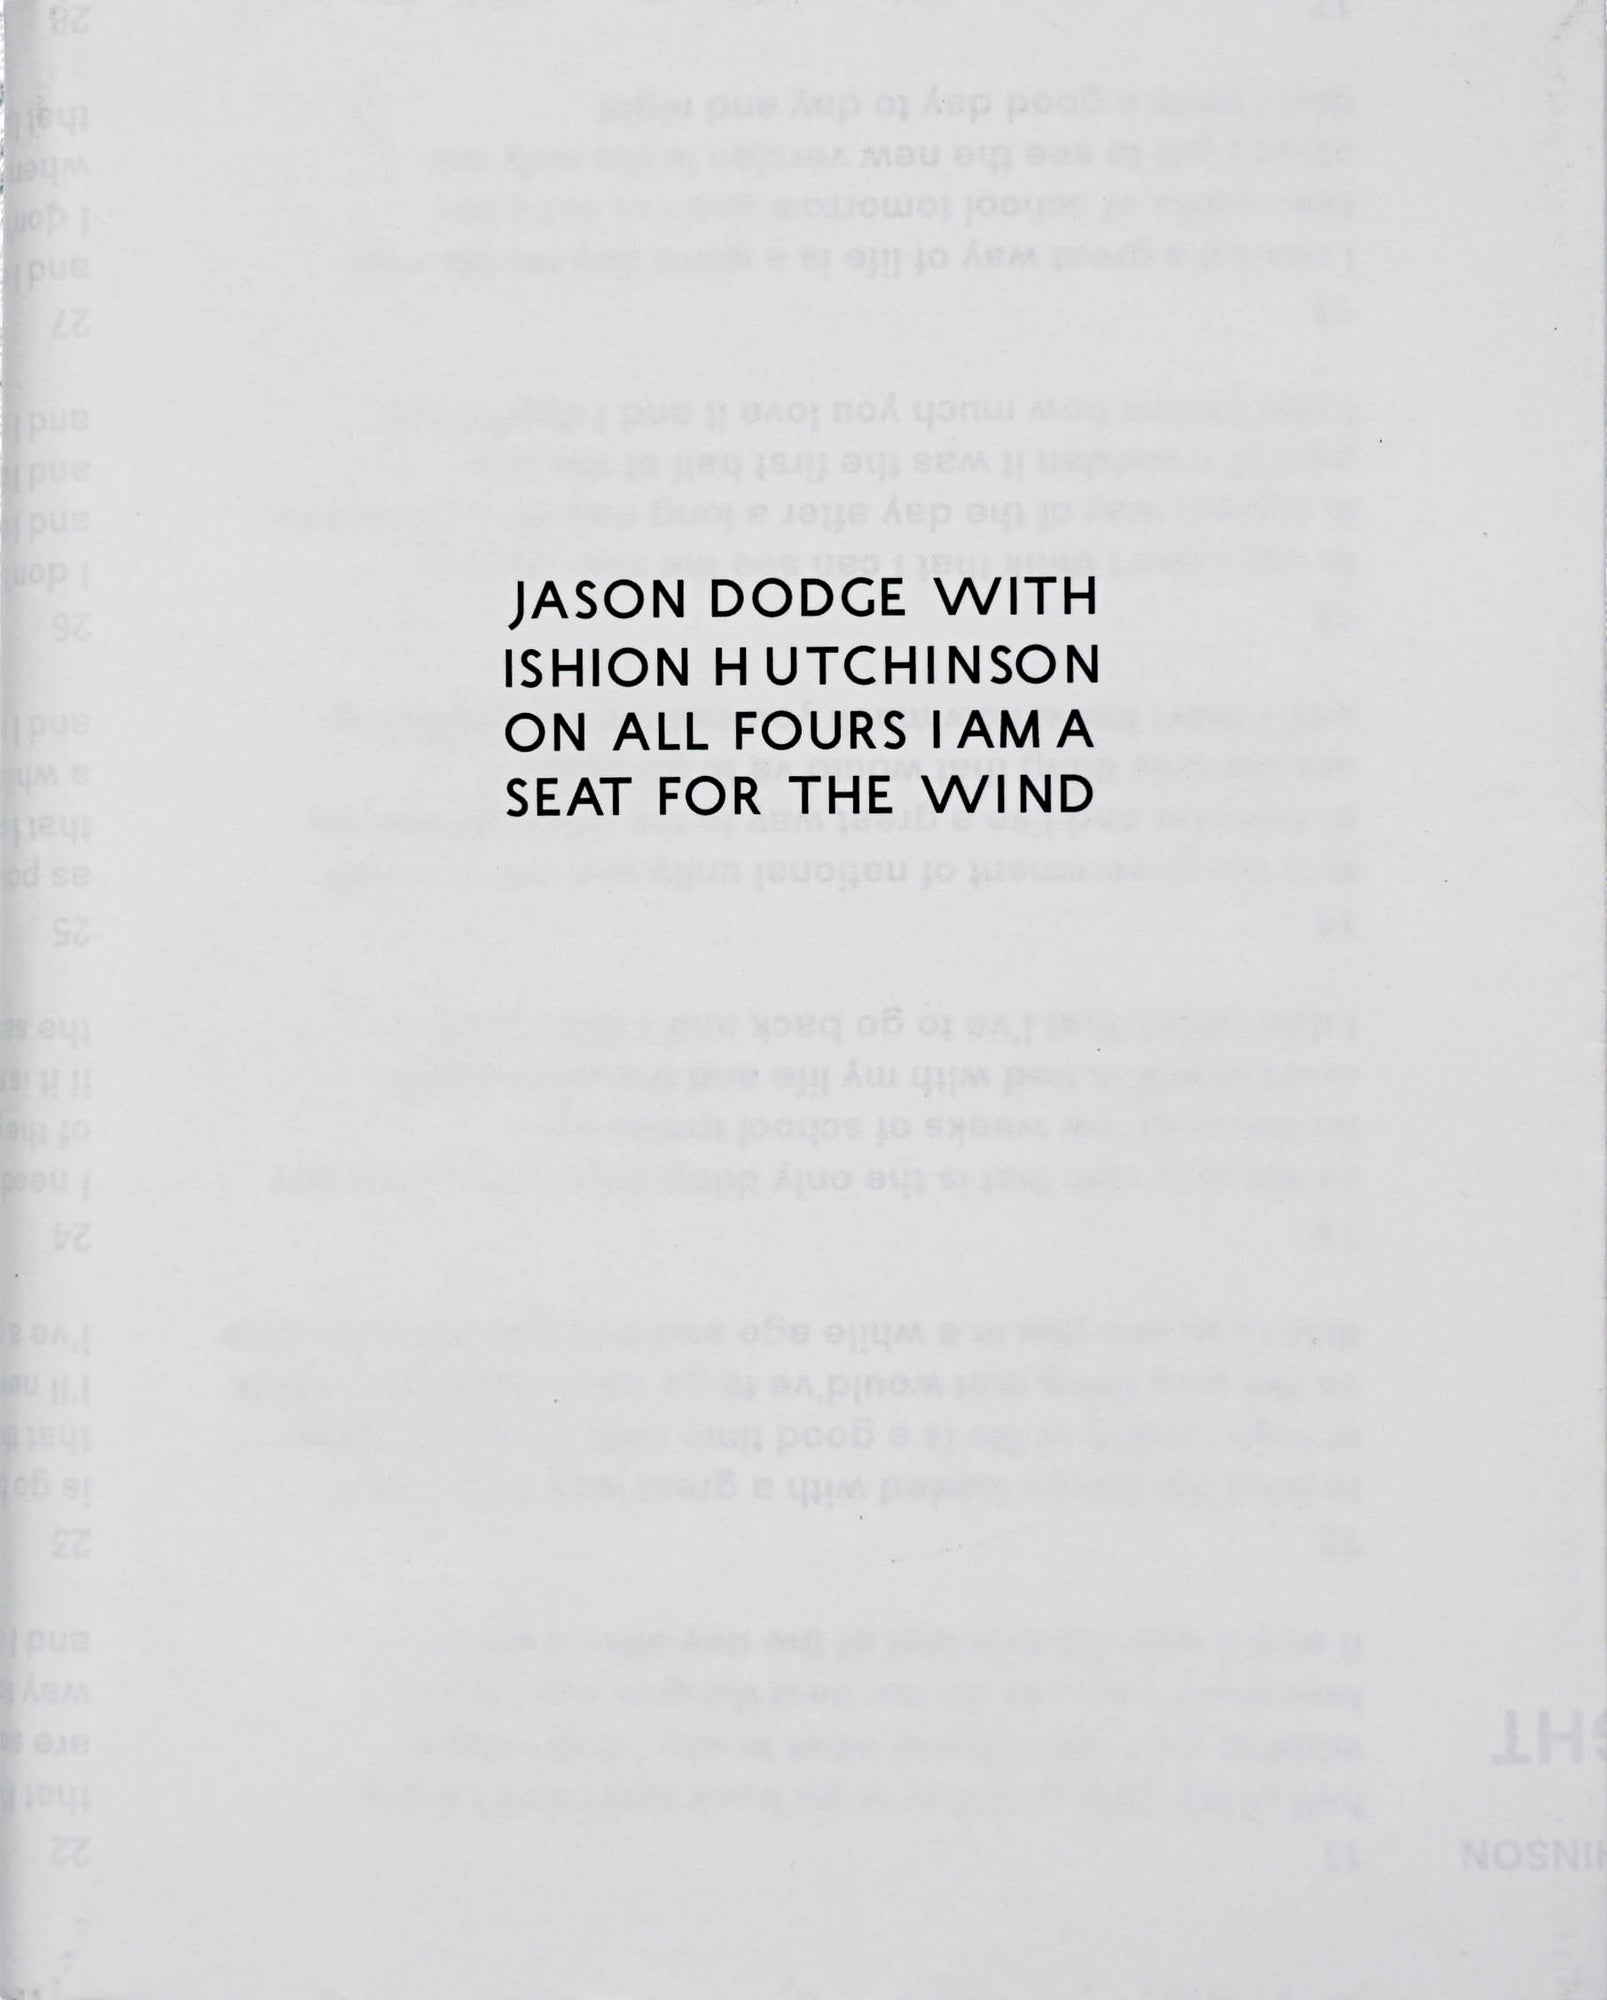 JASON DODGE WITH ISHION HUTCHINSON On All Fours I Am A Seat For The Wind in sans serif type on white newsprint backdrop 